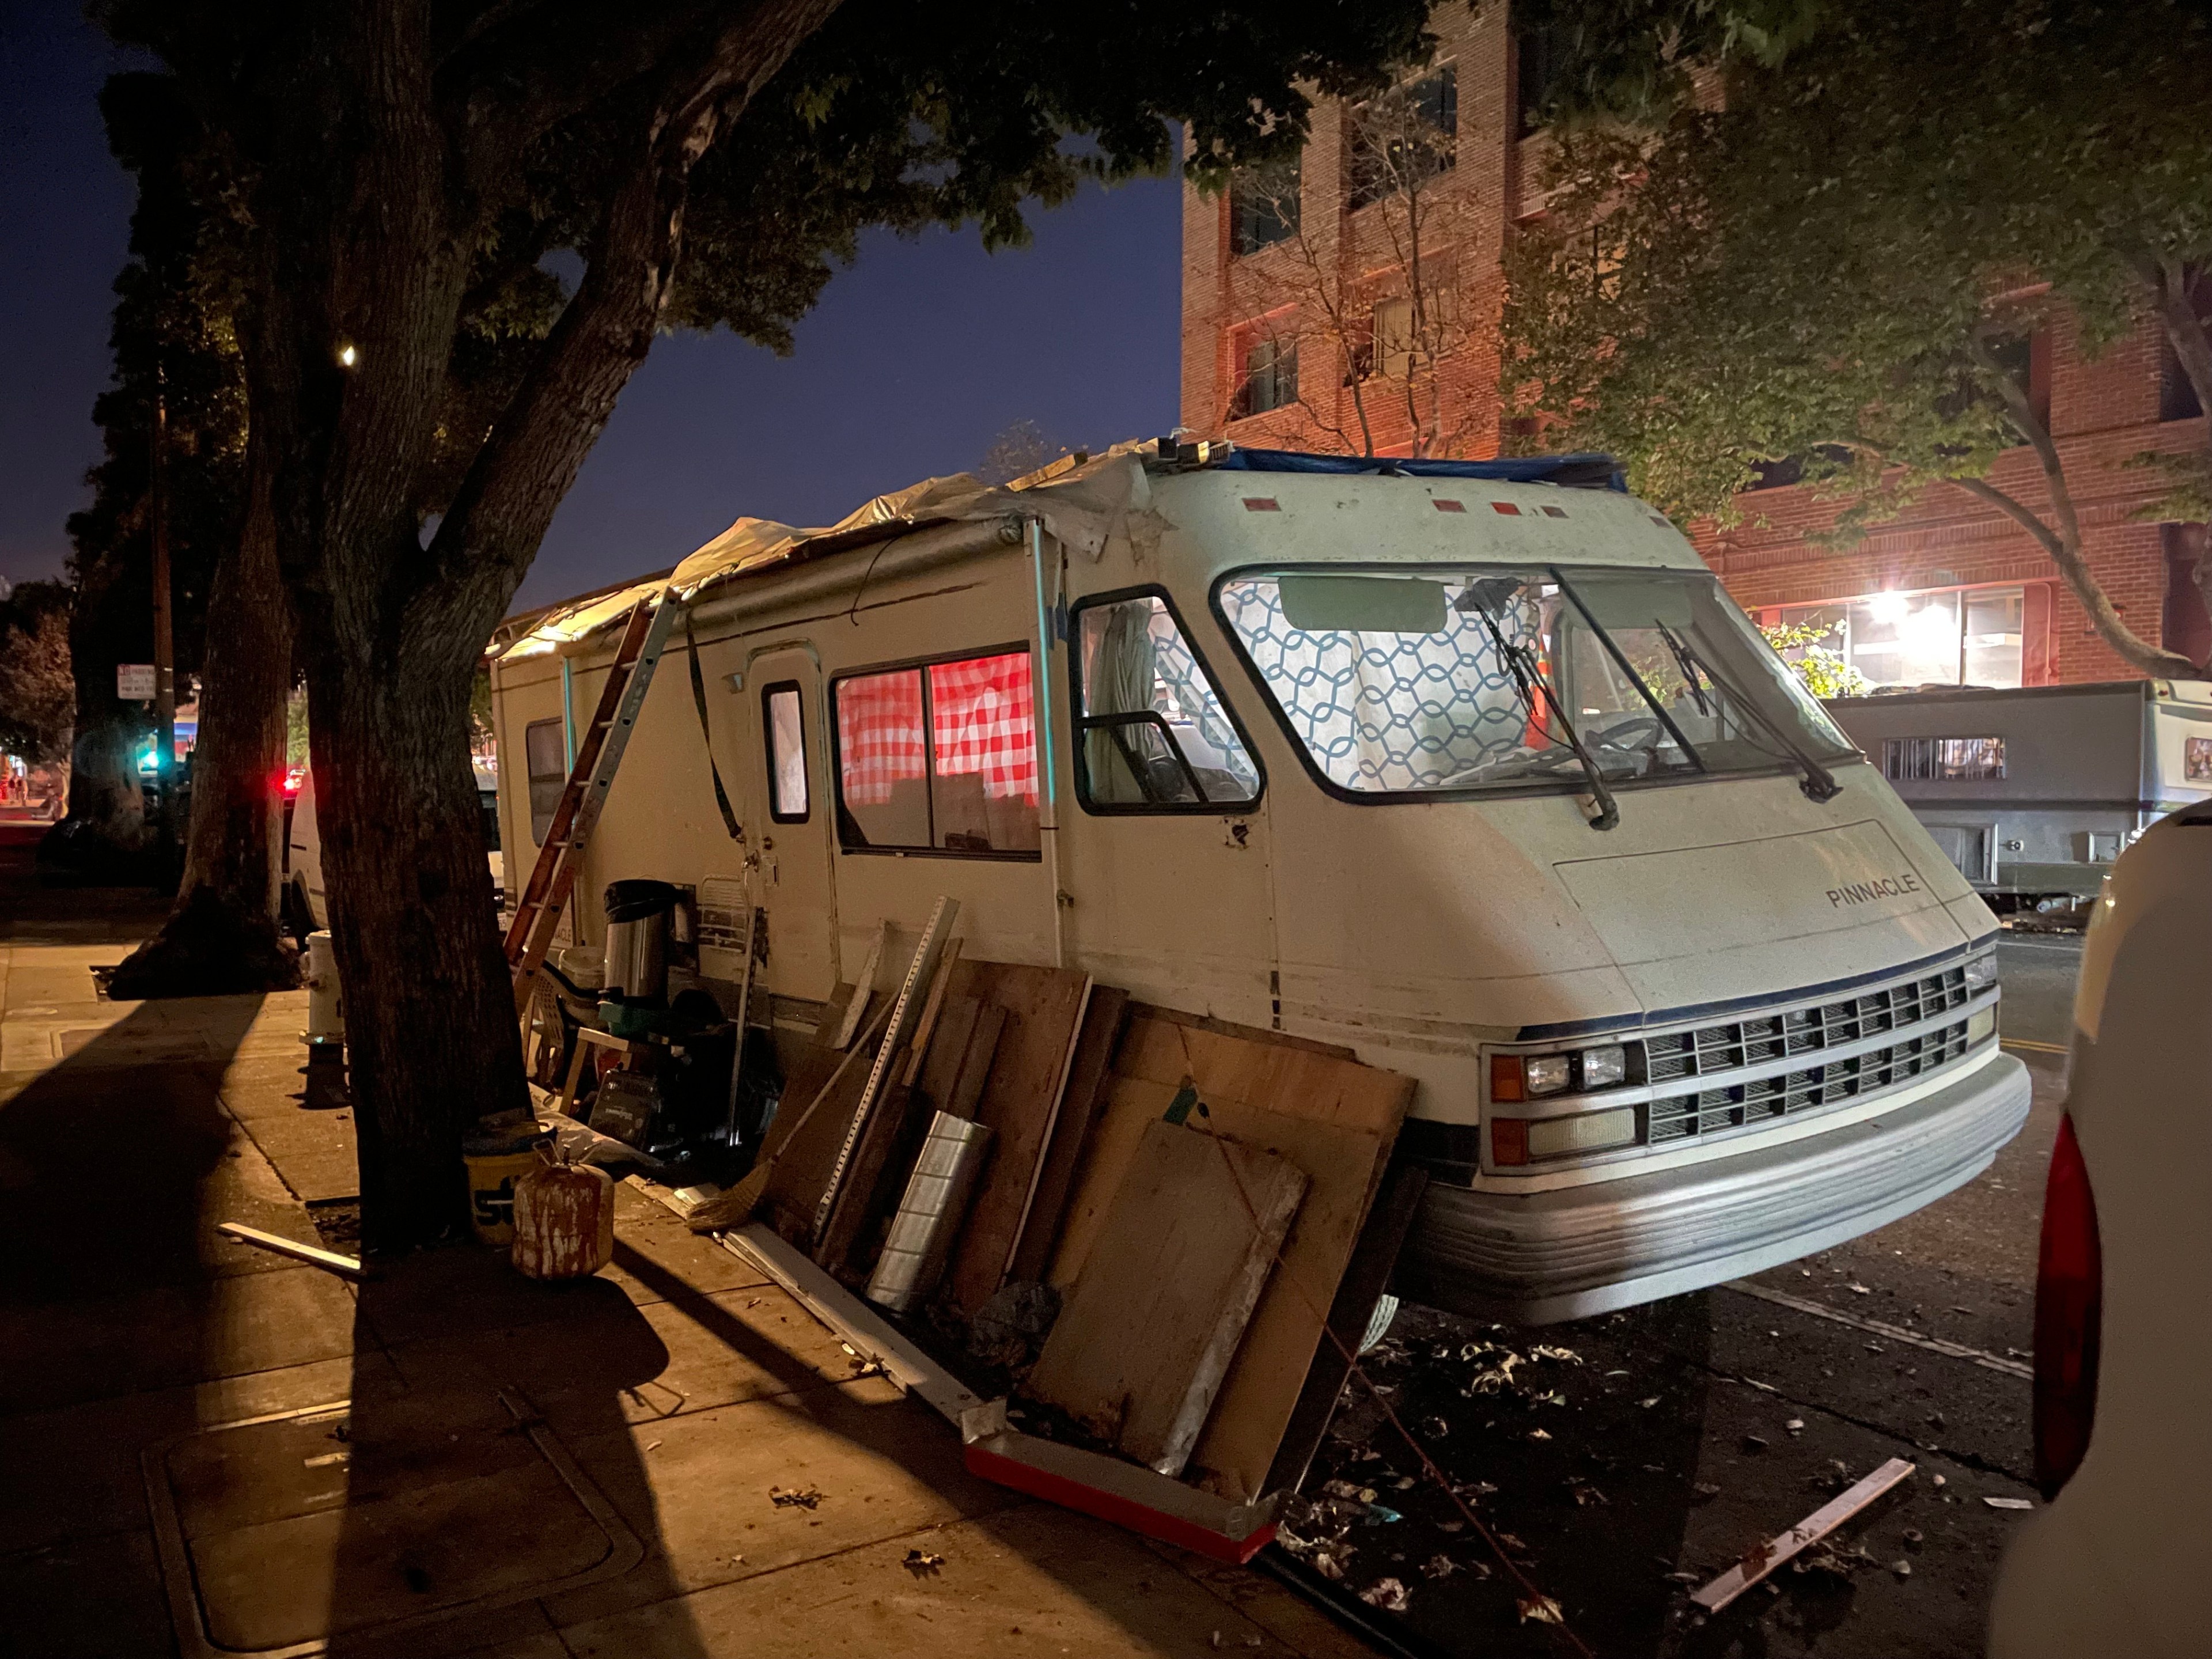 An RV is seen parked on a street.